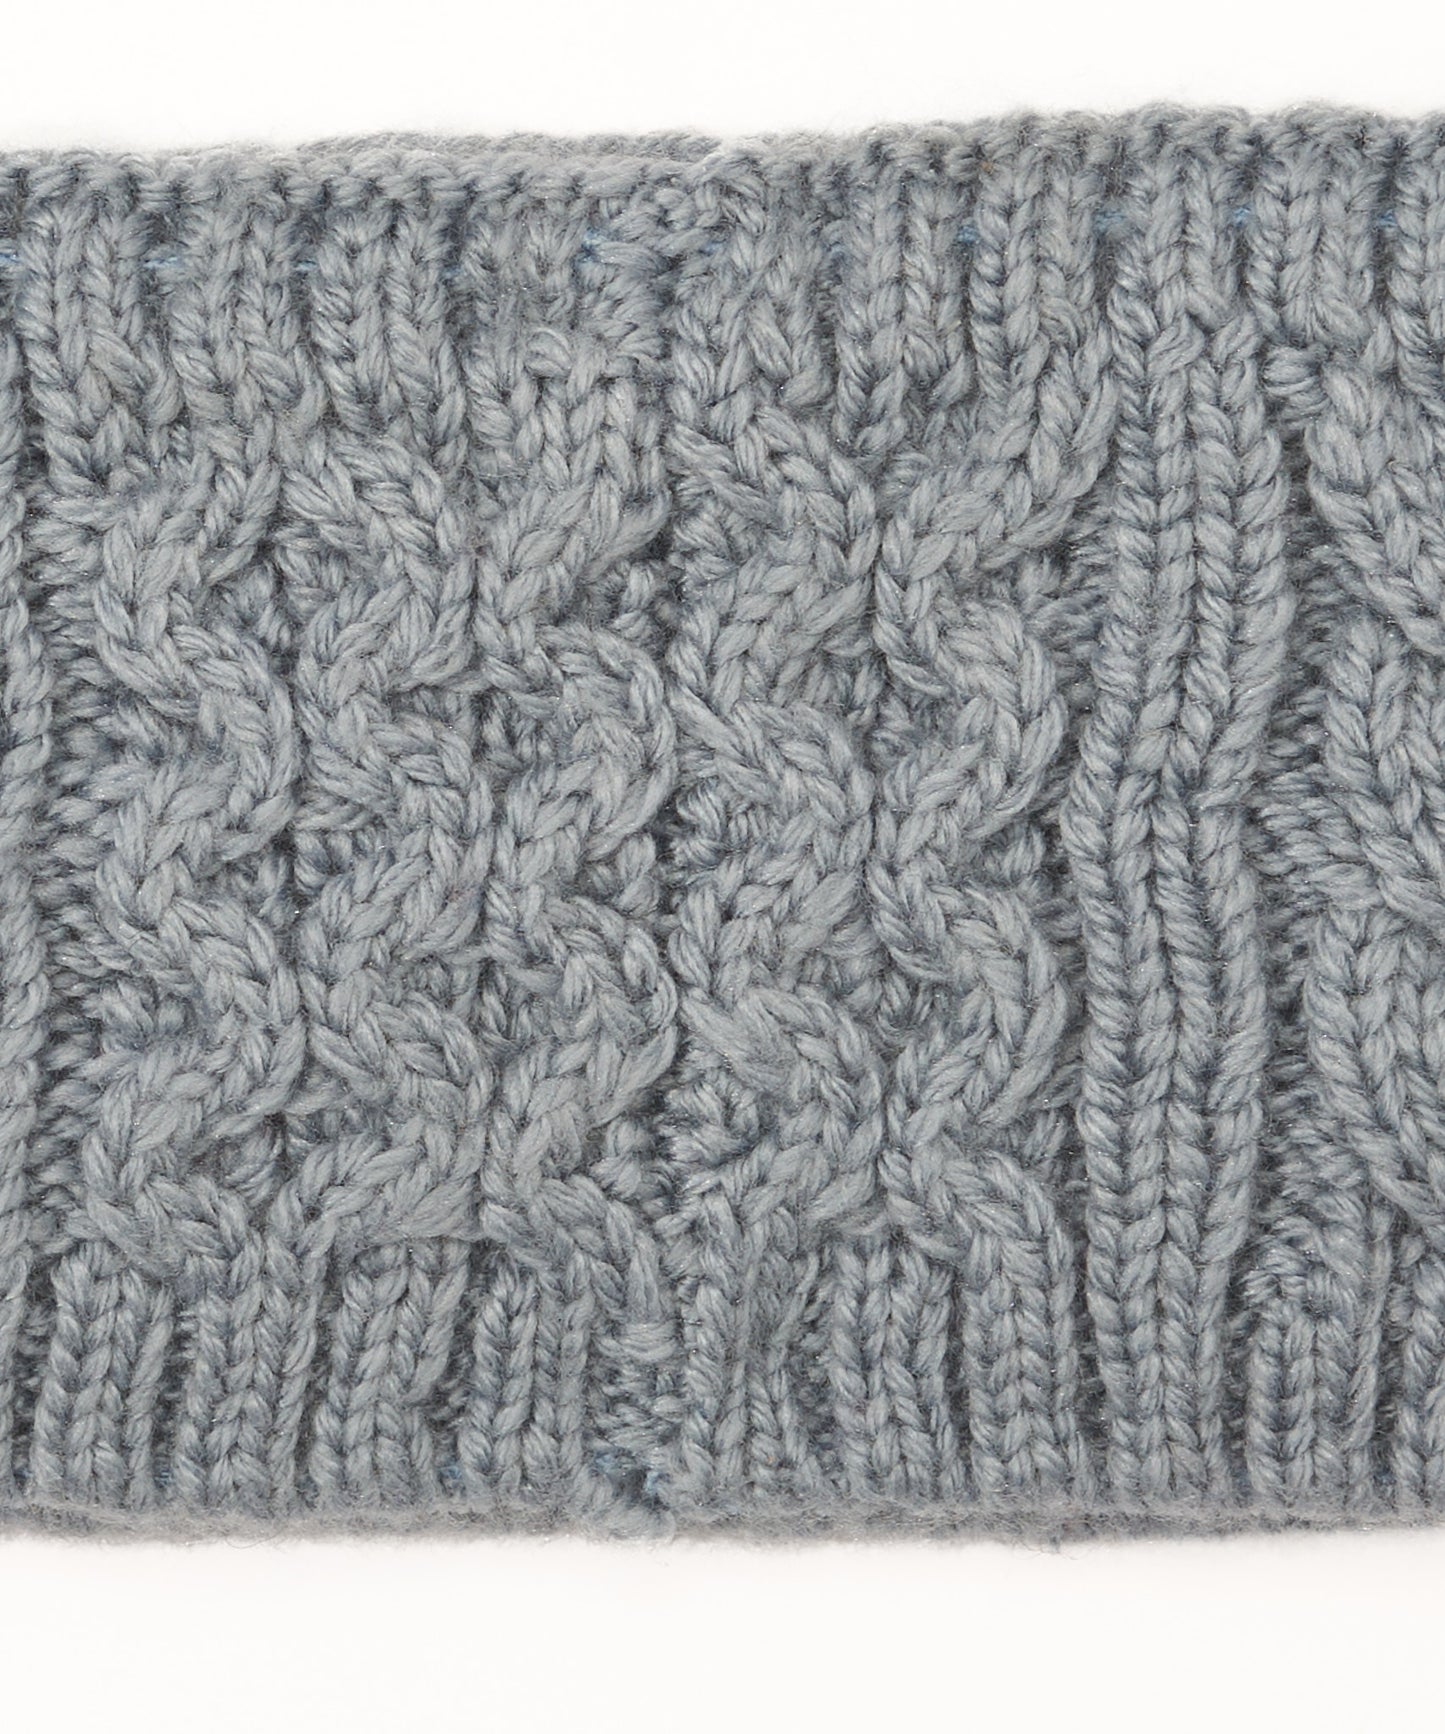 Recycled Wishbone Cable Headband in color Blue Shadow